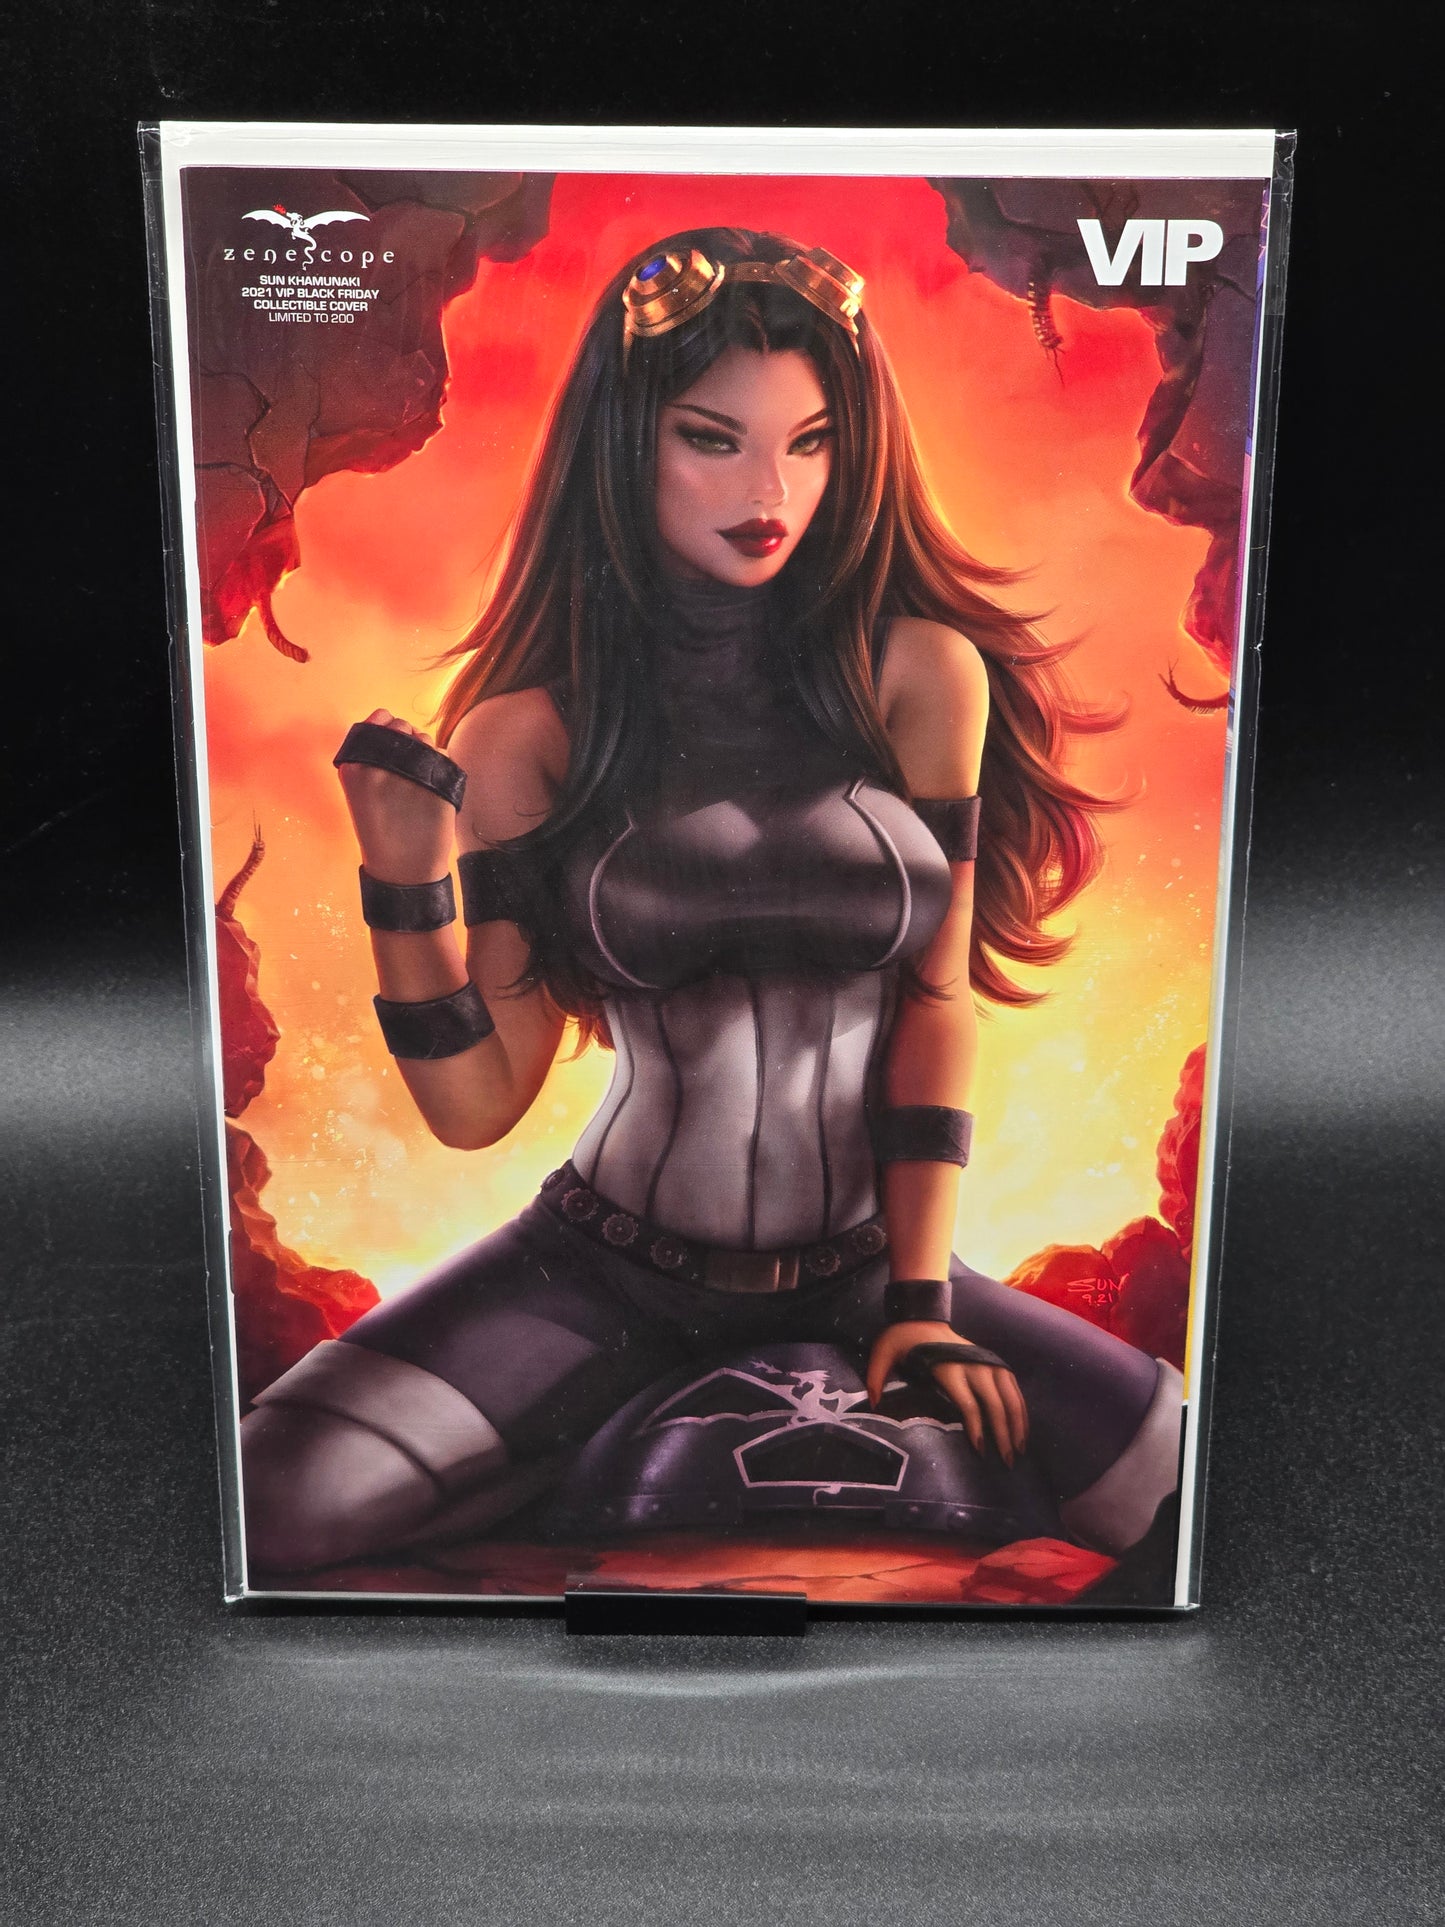 Grimm Fairy Tales, Vol. 2 #53 - Cover G (2021 VIP Black Friday Exclusive)